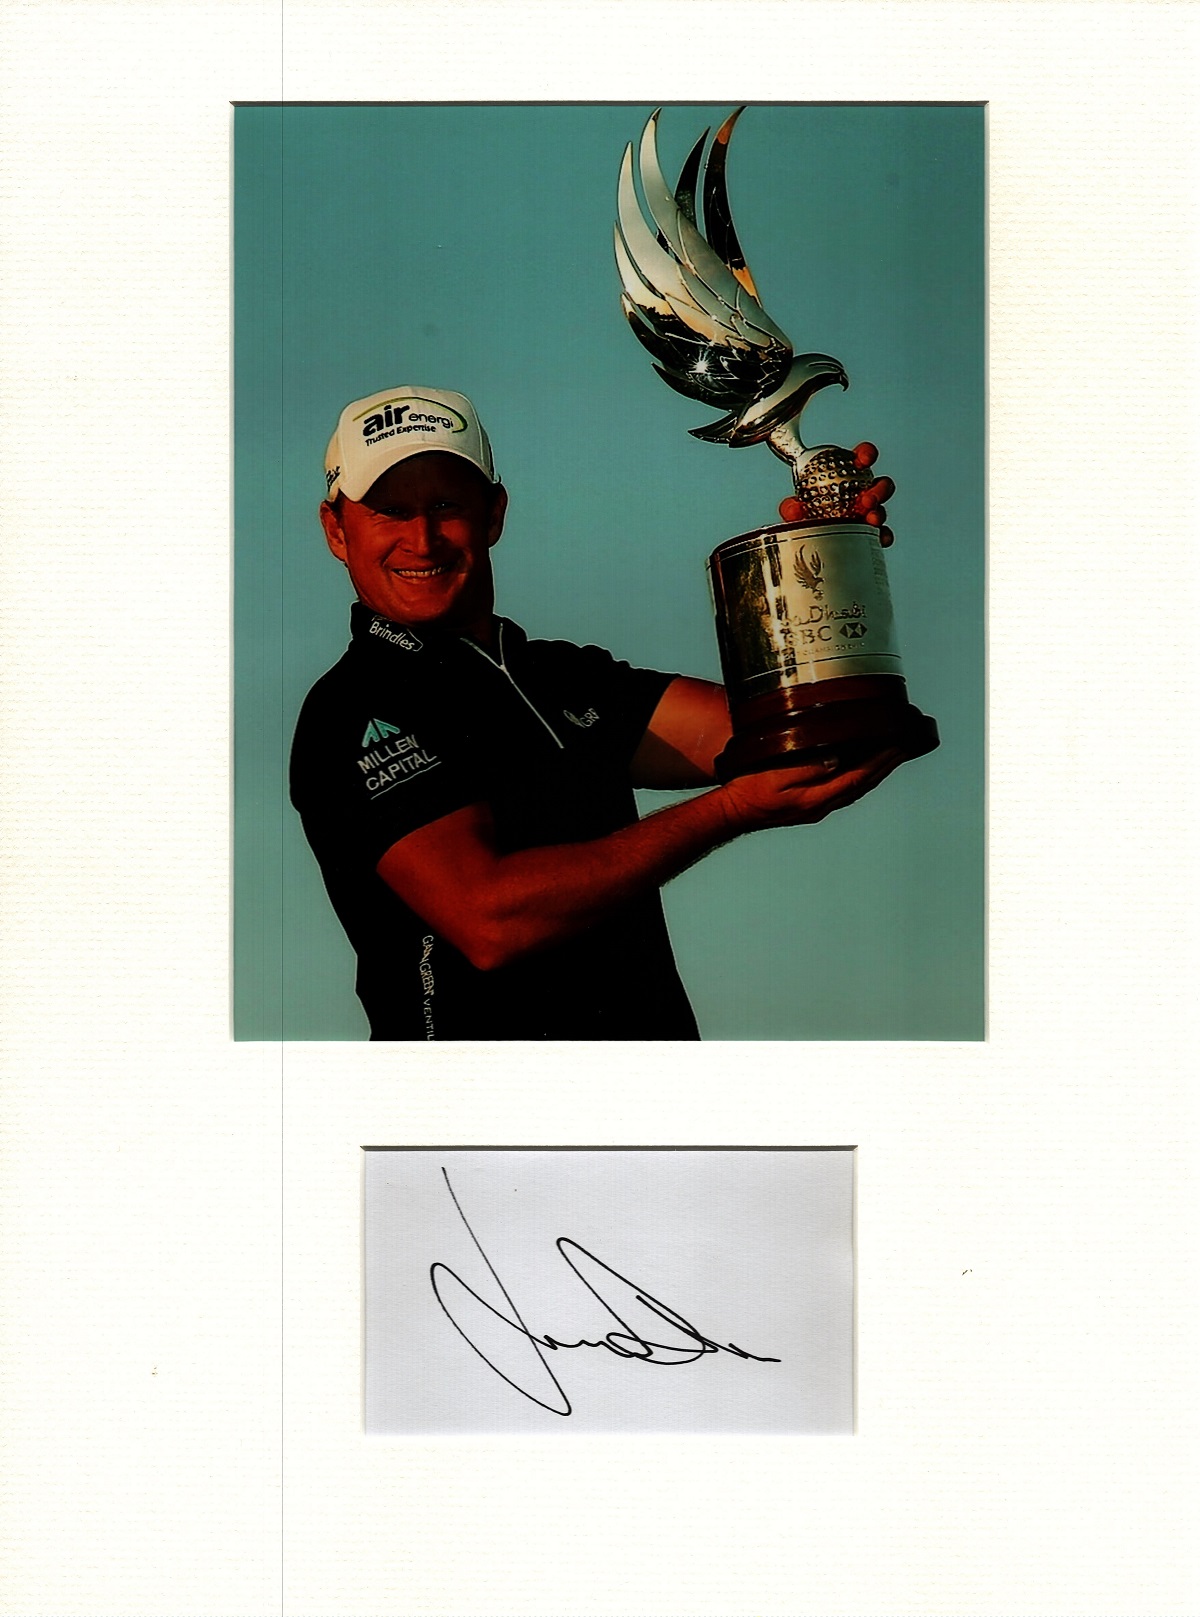 Golf Jamie Donaldson 16x12 overall mounted signature piece includes a signed album page and a colour